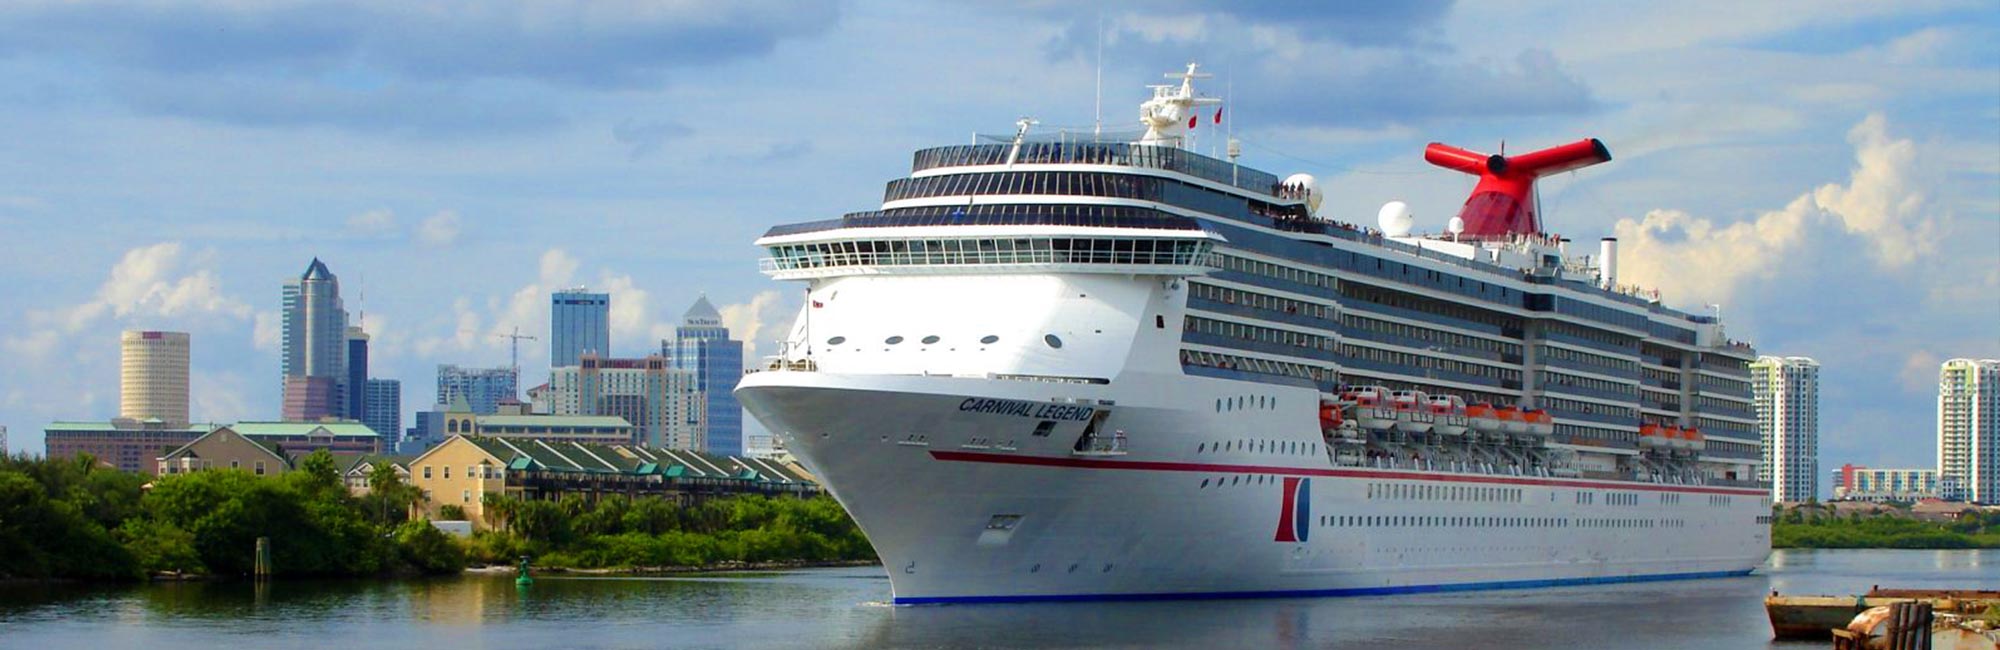 view of cruise ship in tampa port